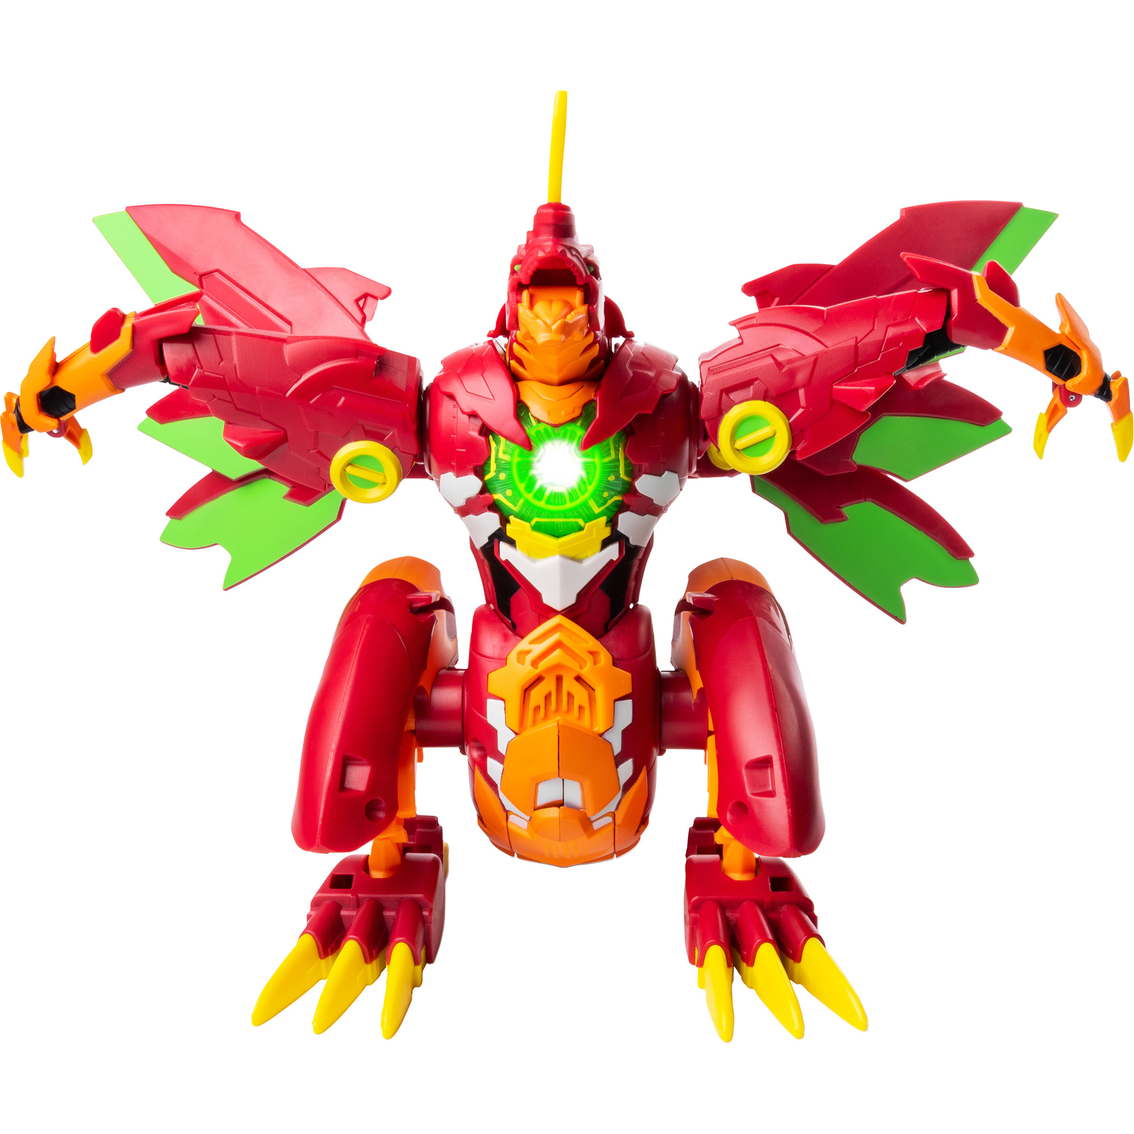 New Bakugan Dragonoid Maximus Toy Transforming Figure with Lights and SoundTM 